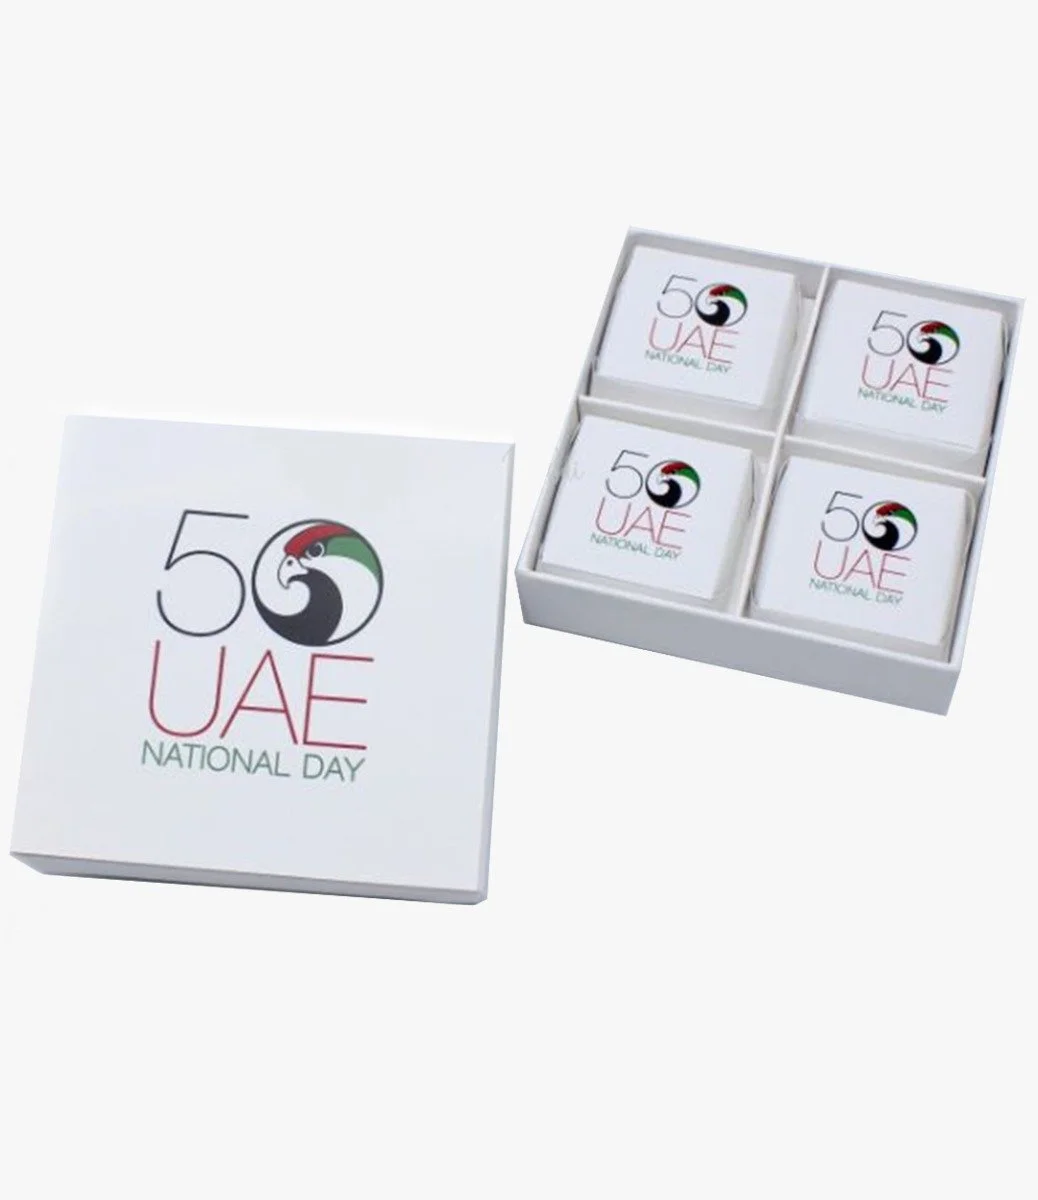 50 Years UAE Falcon - National Day Gift Box 80g - Pack of 10 Boxes By Le Chocolatier